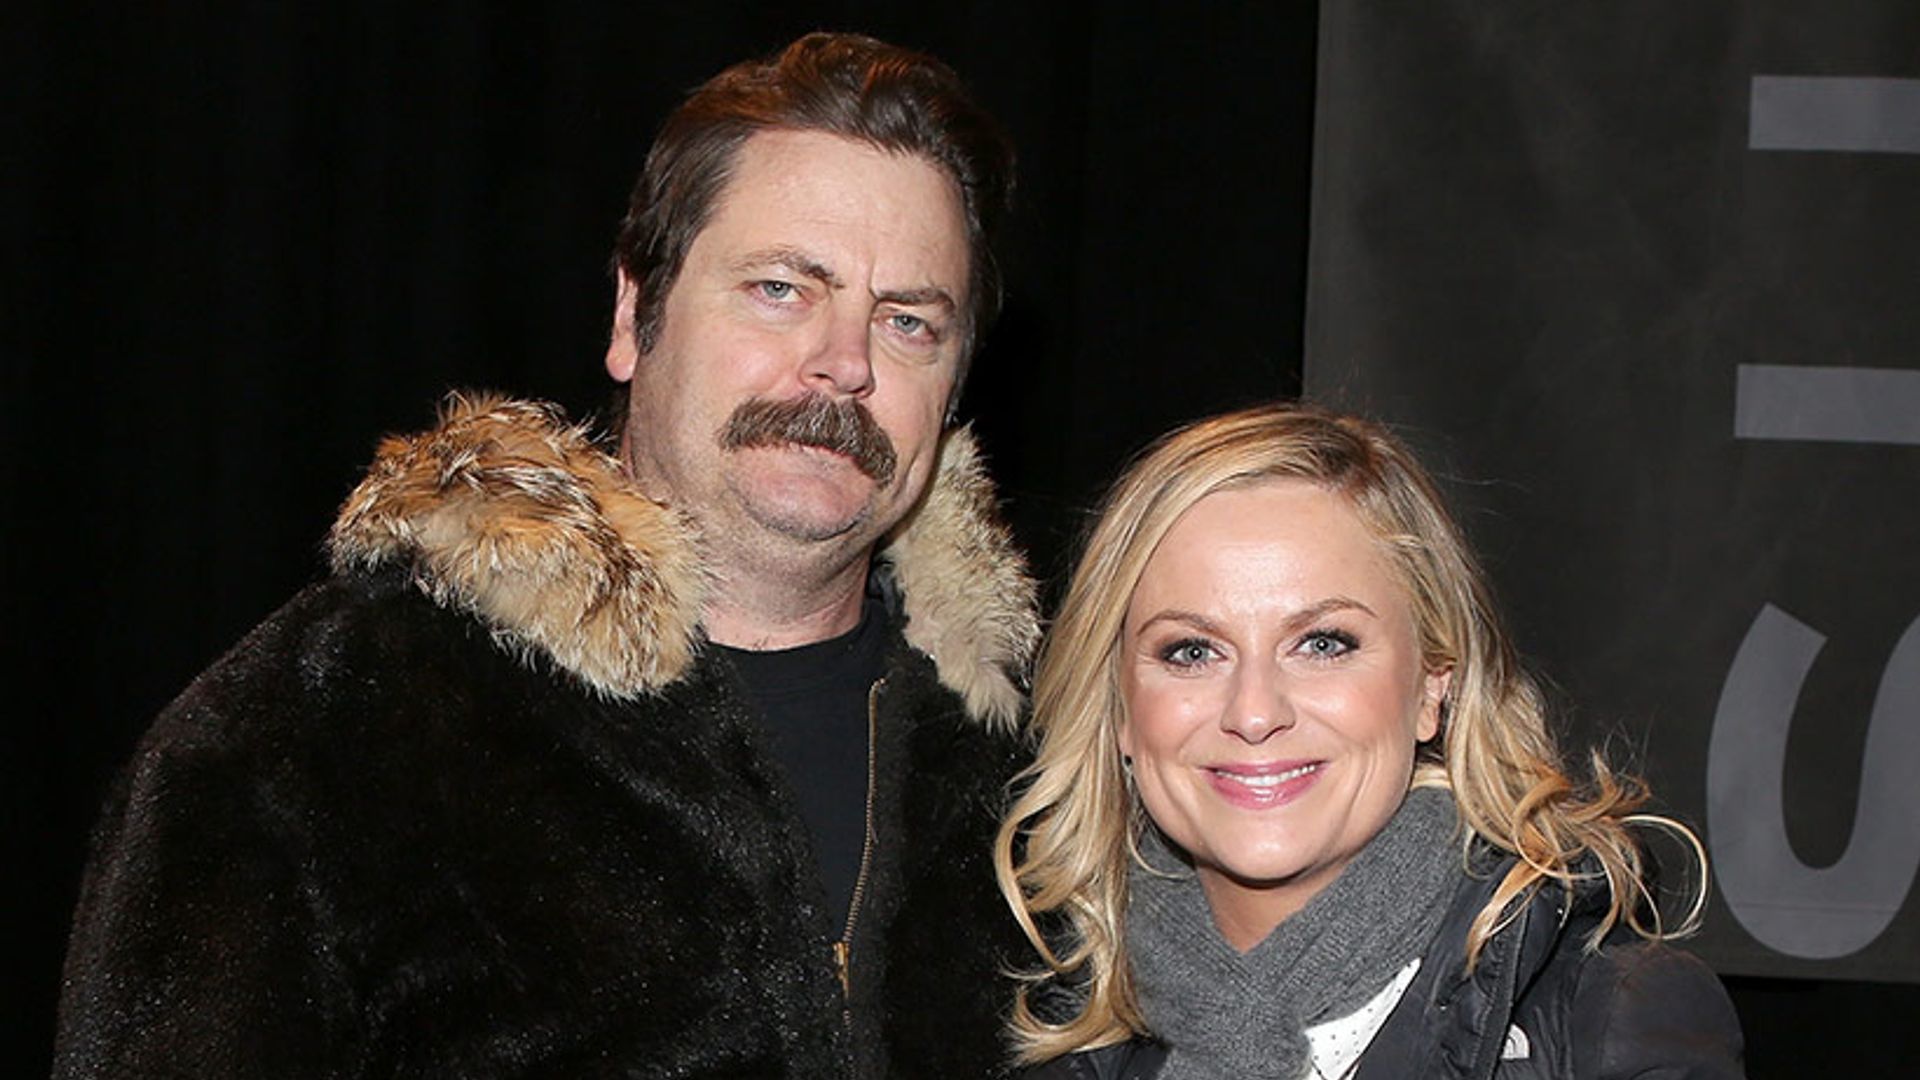 Calling all Parks and Recreation fans! Leslie Knope and Ron Swanson to reunite on new show